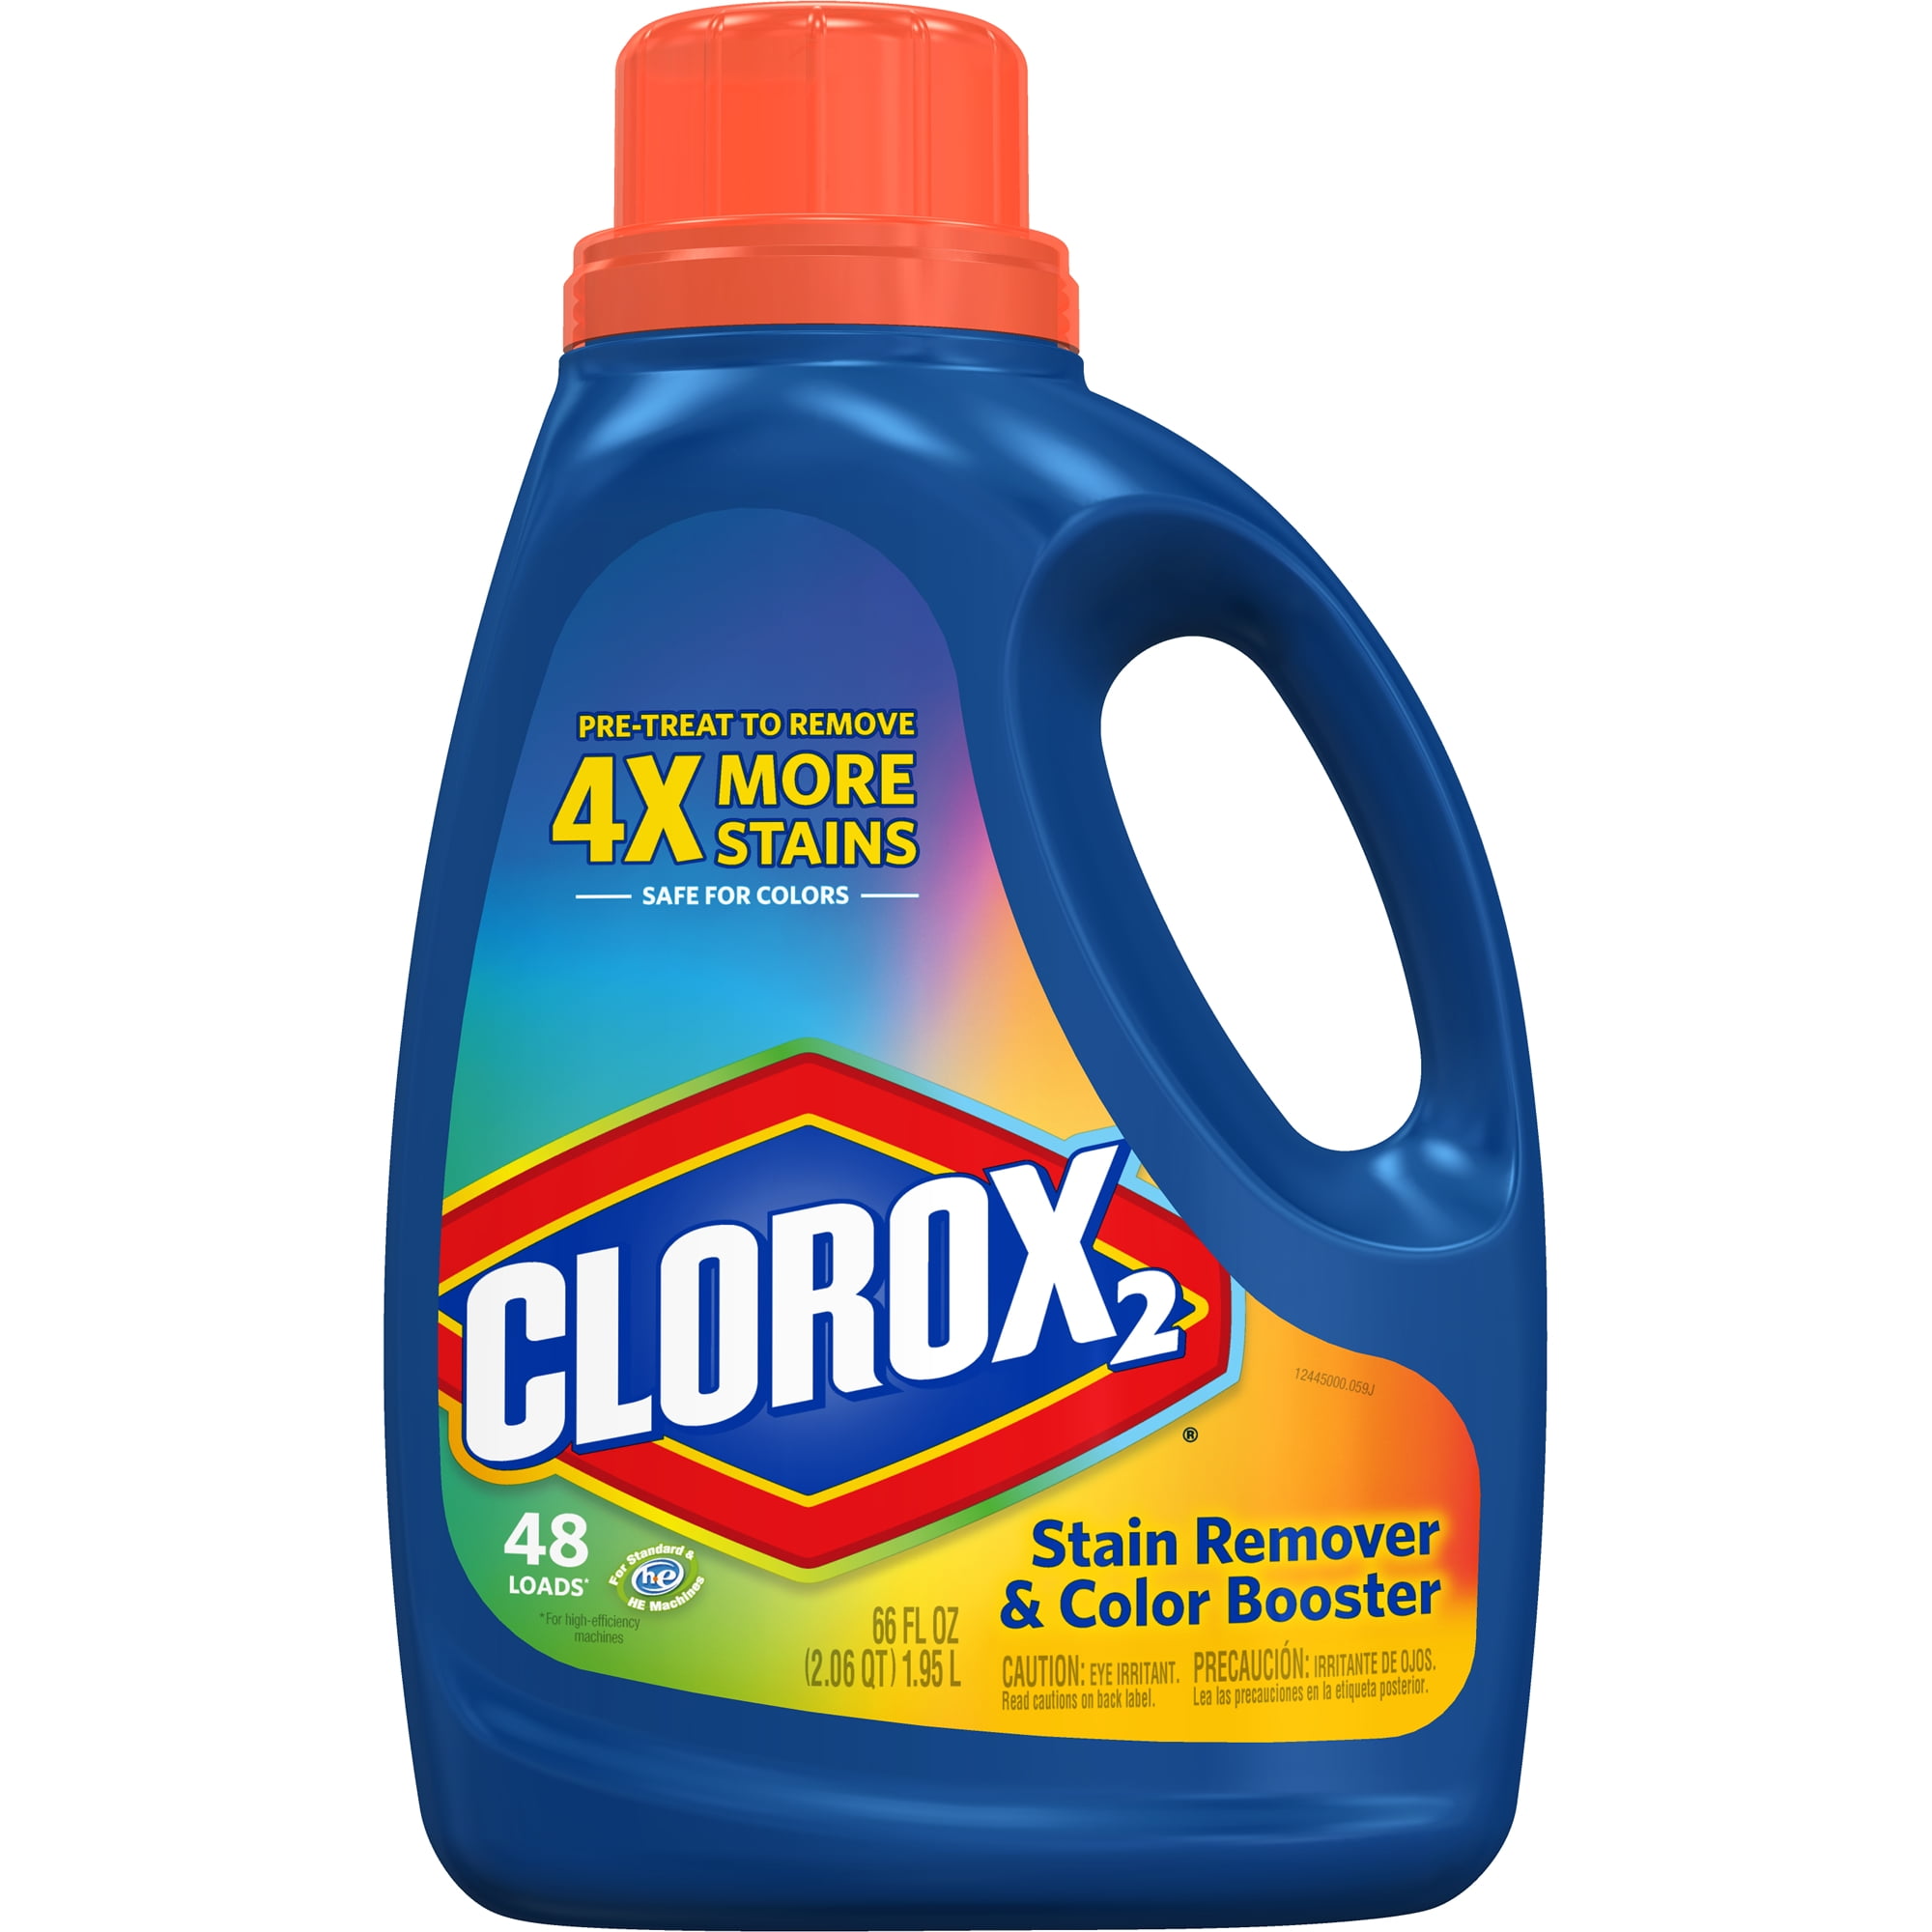 Color safe. Клорокс. Clorox жидкость. Stain Remover,Bleach. Oxiclean, Clorox 2, Country save Bleach или Purex 2 Color safe Bleach).